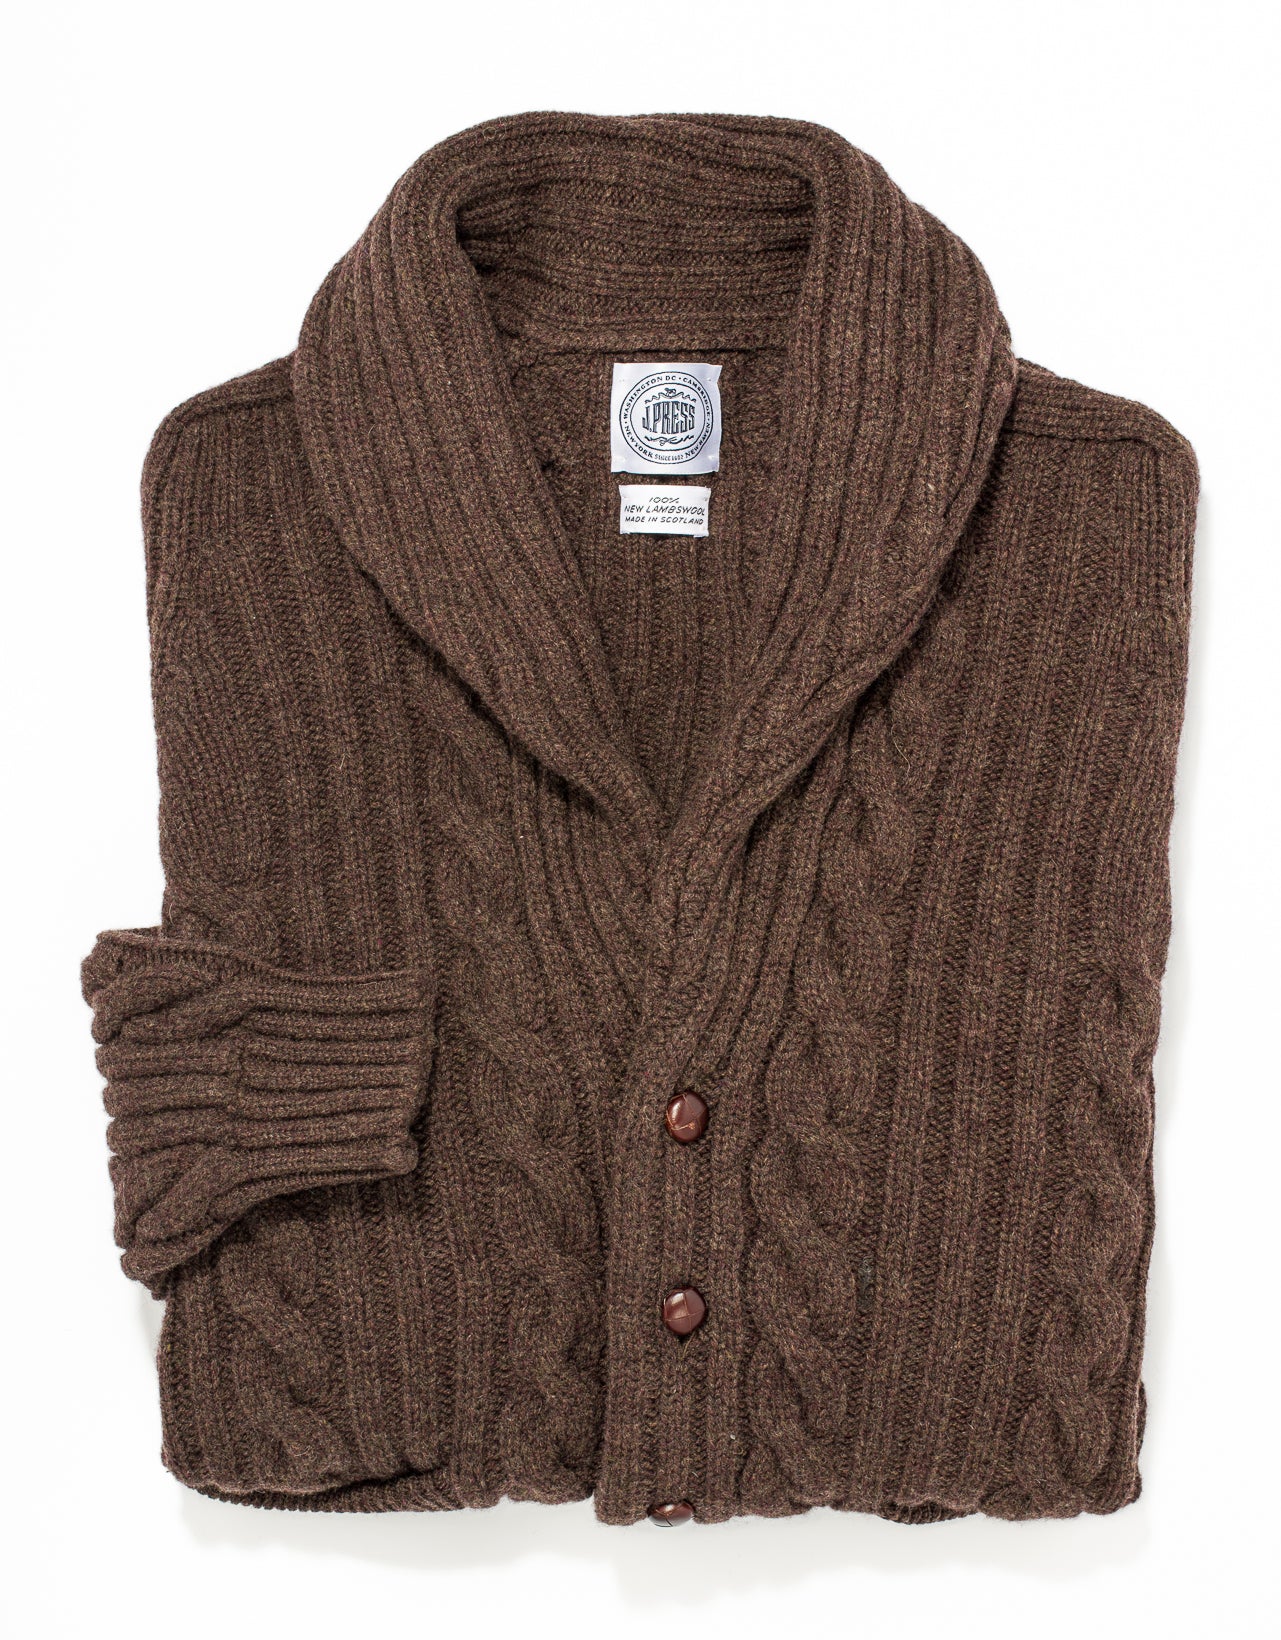 RUST LAMBSWOOL CABLE CARDIGAN